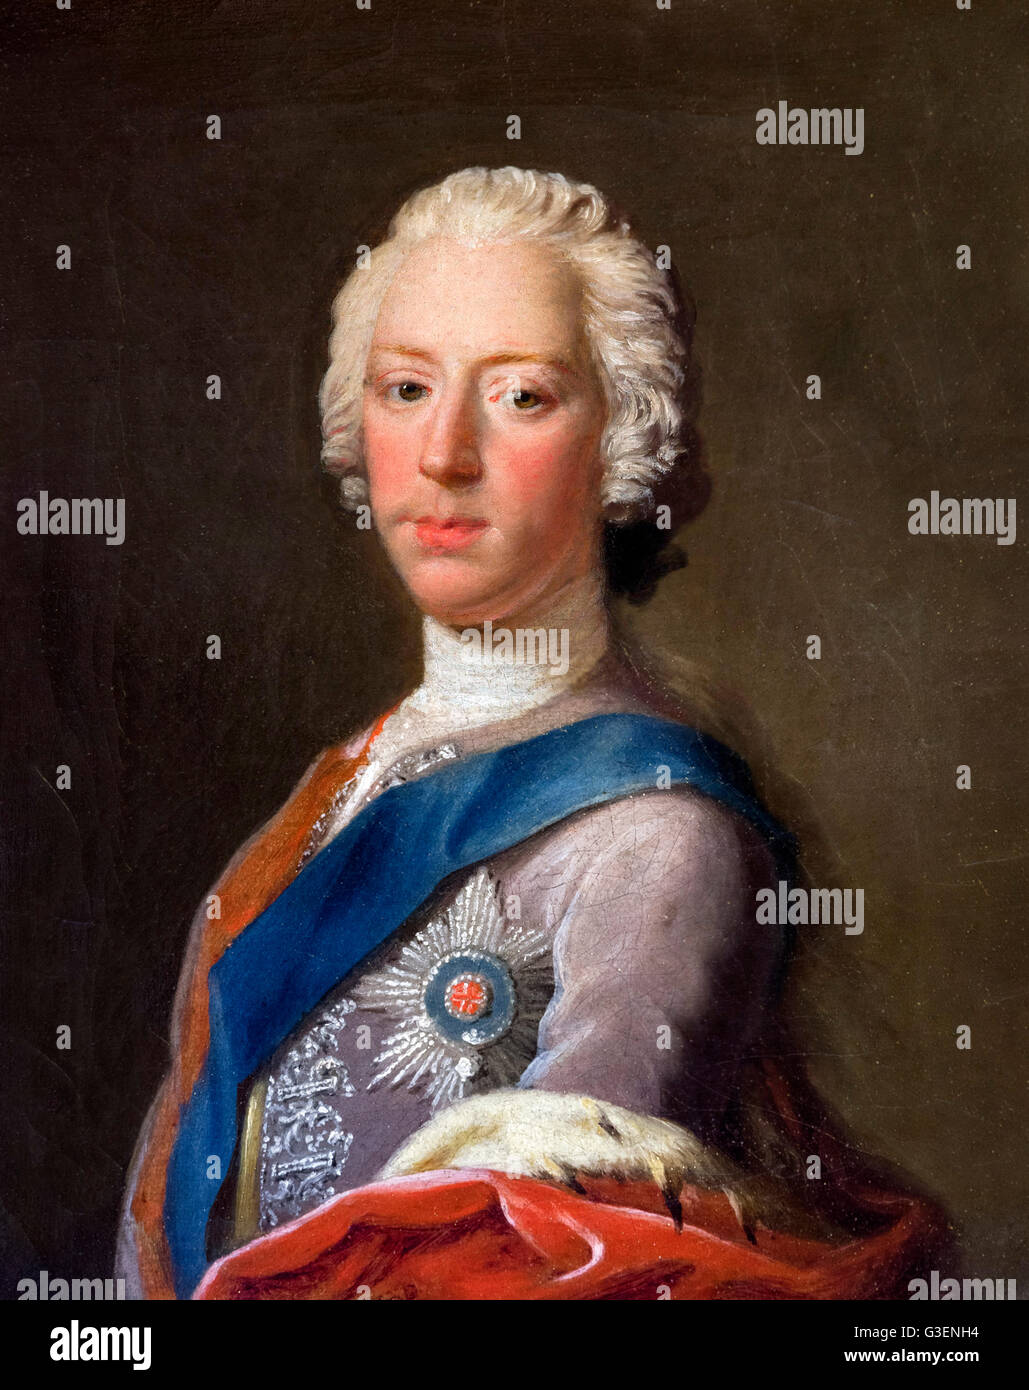 Bonnie Prince Charlie portrait. Prince Charles Edward Stuart (1720-1788), painting by Allan Ramsay, oil on canvas, c.1745. Stock Photo